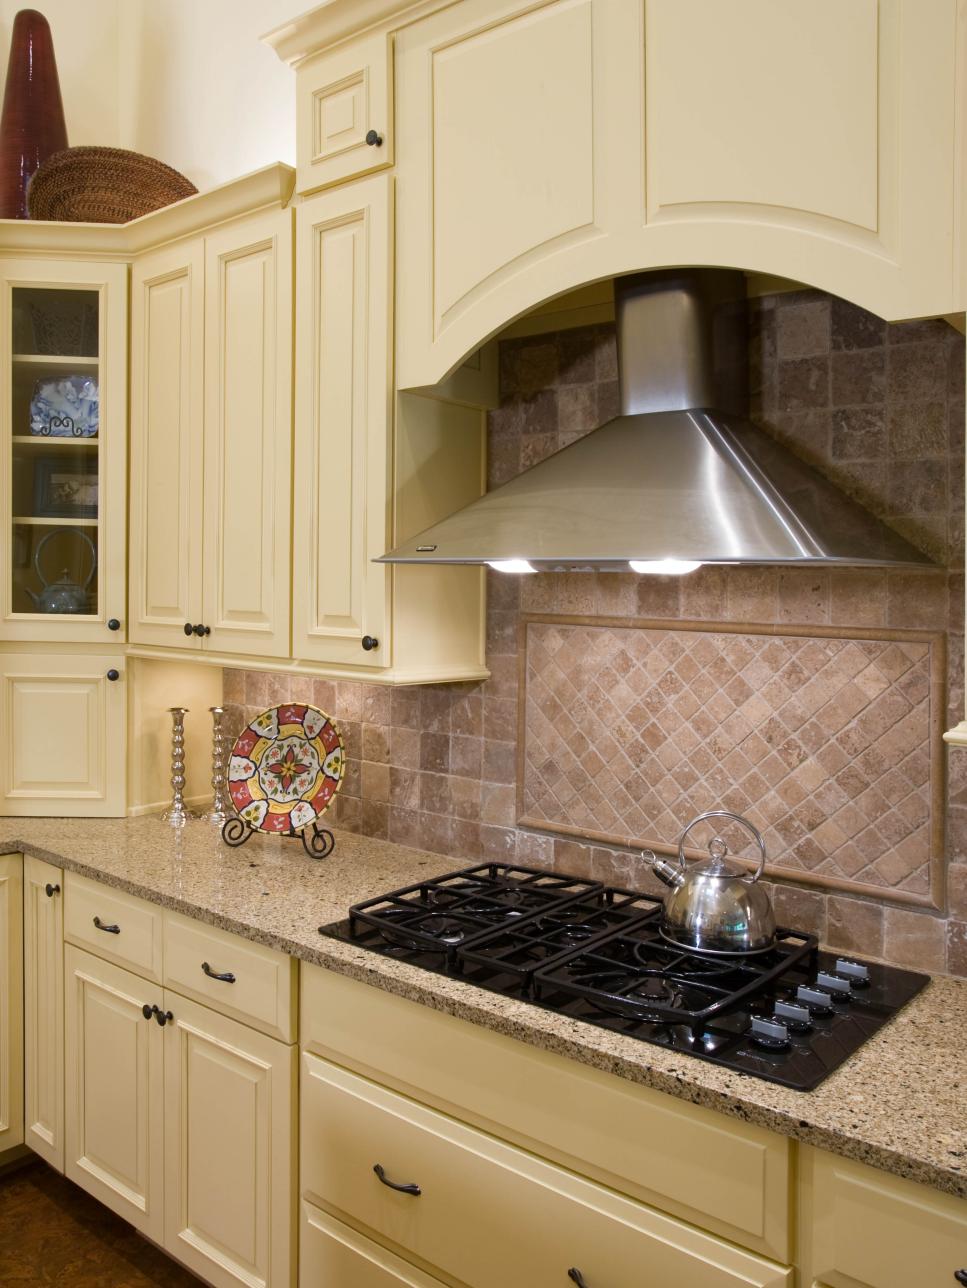 Stainless Steel Range Hood With Cream-Colored Cabinets